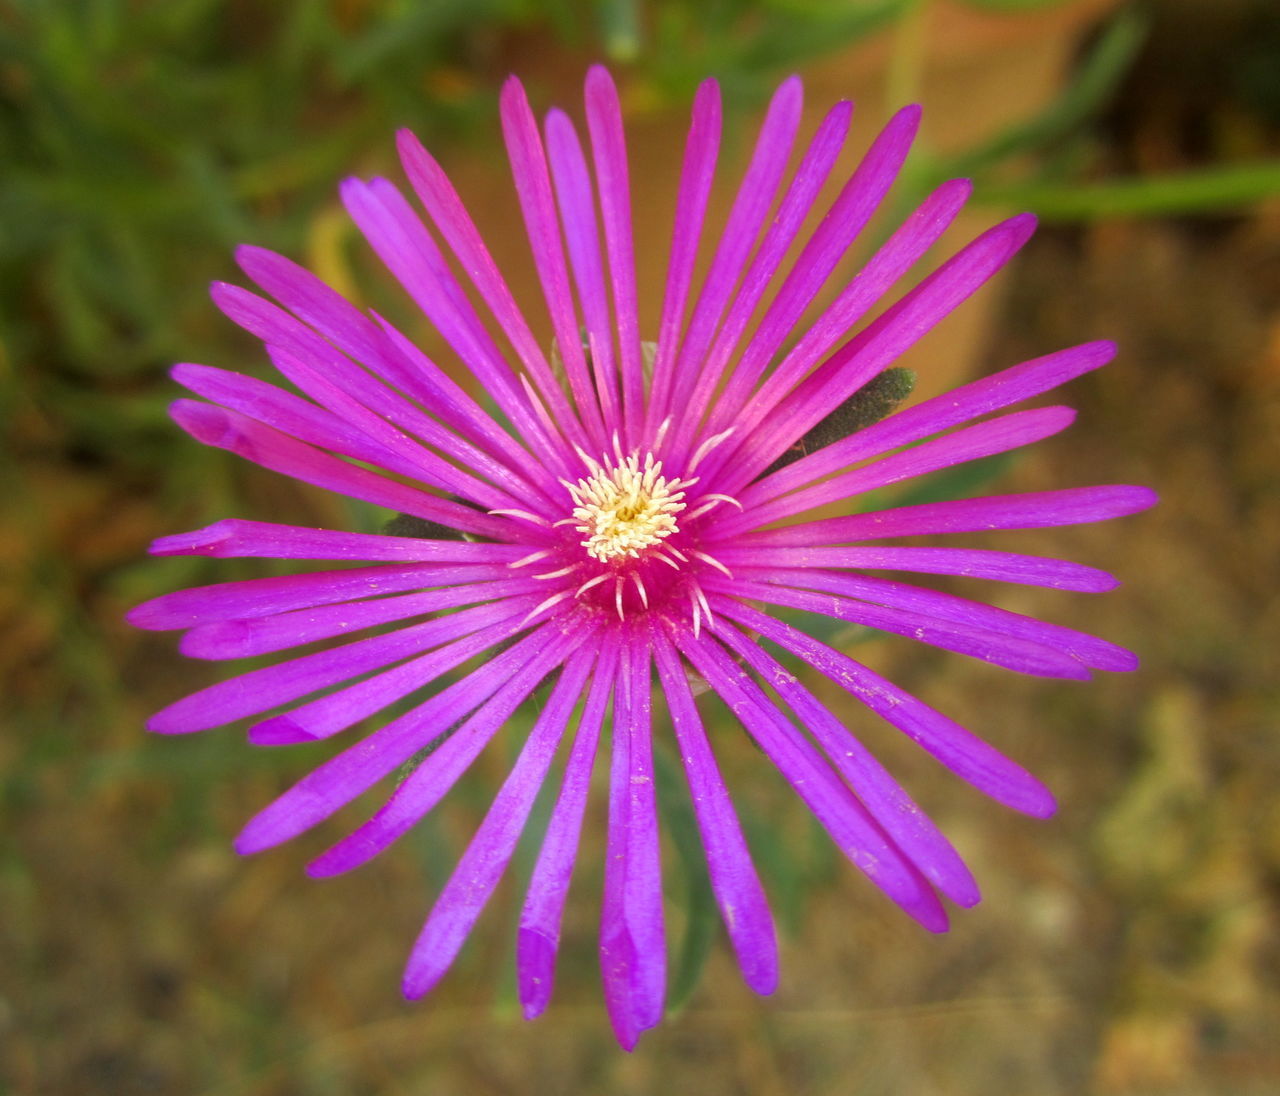 flower, flowering plant, plant, freshness, beauty in nature, purple, close-up, macro photography, flower head, nature, inflorescence, petal, pink, fragility, growth, no people, focus on foreground, magenta, outdoors, wildflower, summer, pollen, botany, blossom, aster, springtime, vibrant color, medicine